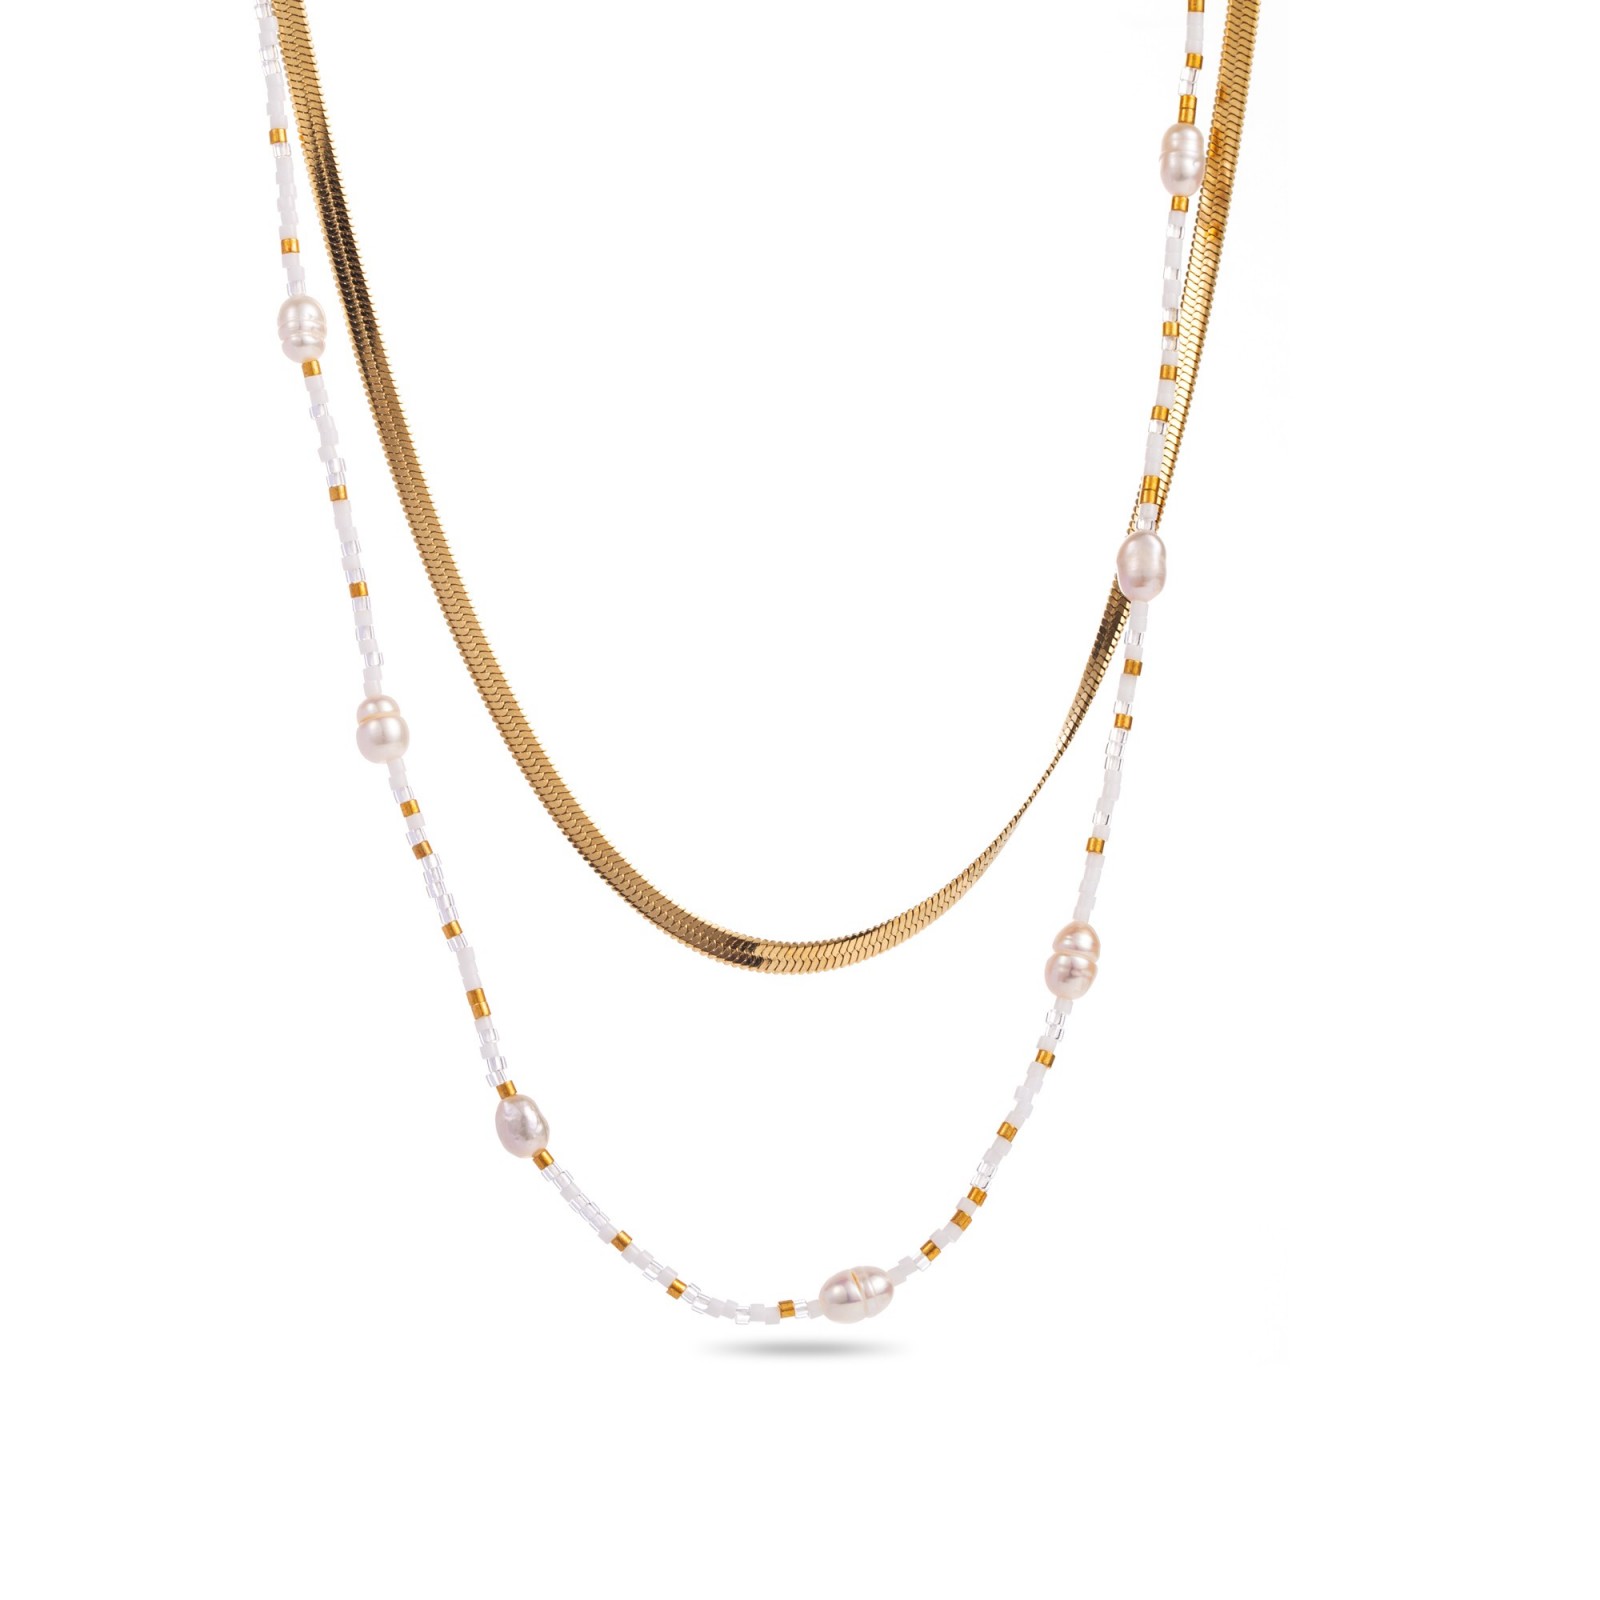 Multirang Necklace with Mother-of-Pearl and Miyuki Color:White